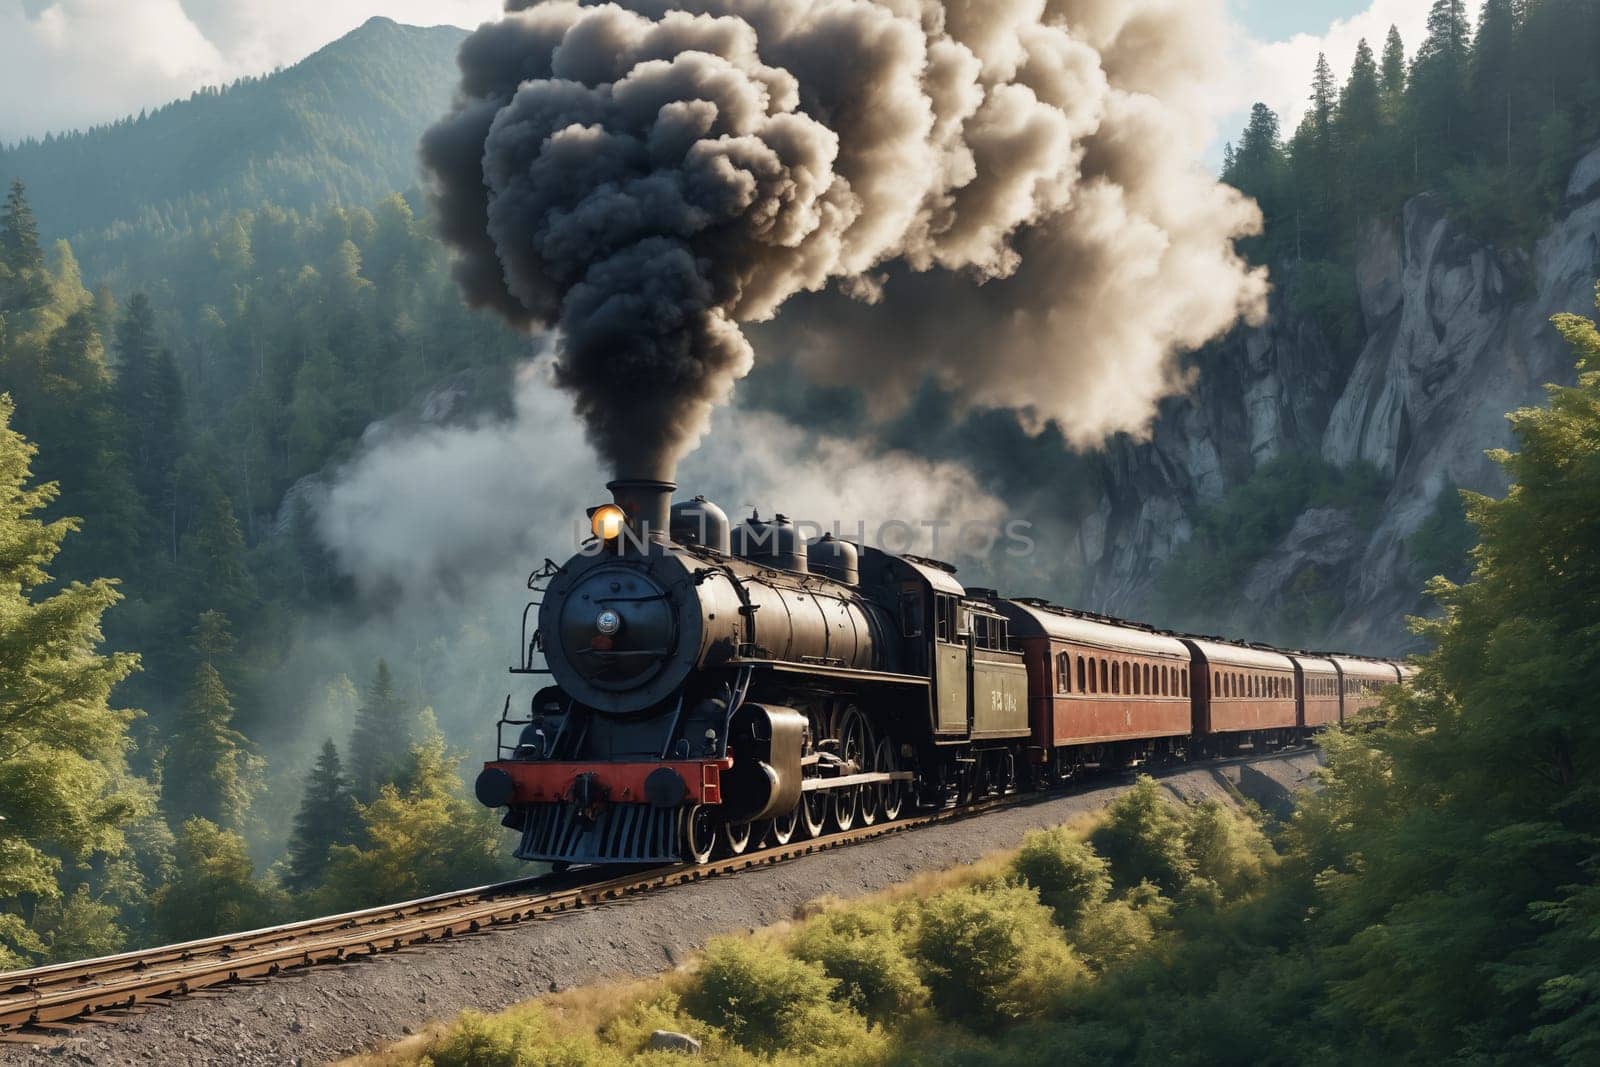 Antique Steam Train's Voyage Along the Forest's Edge by Andre1ns